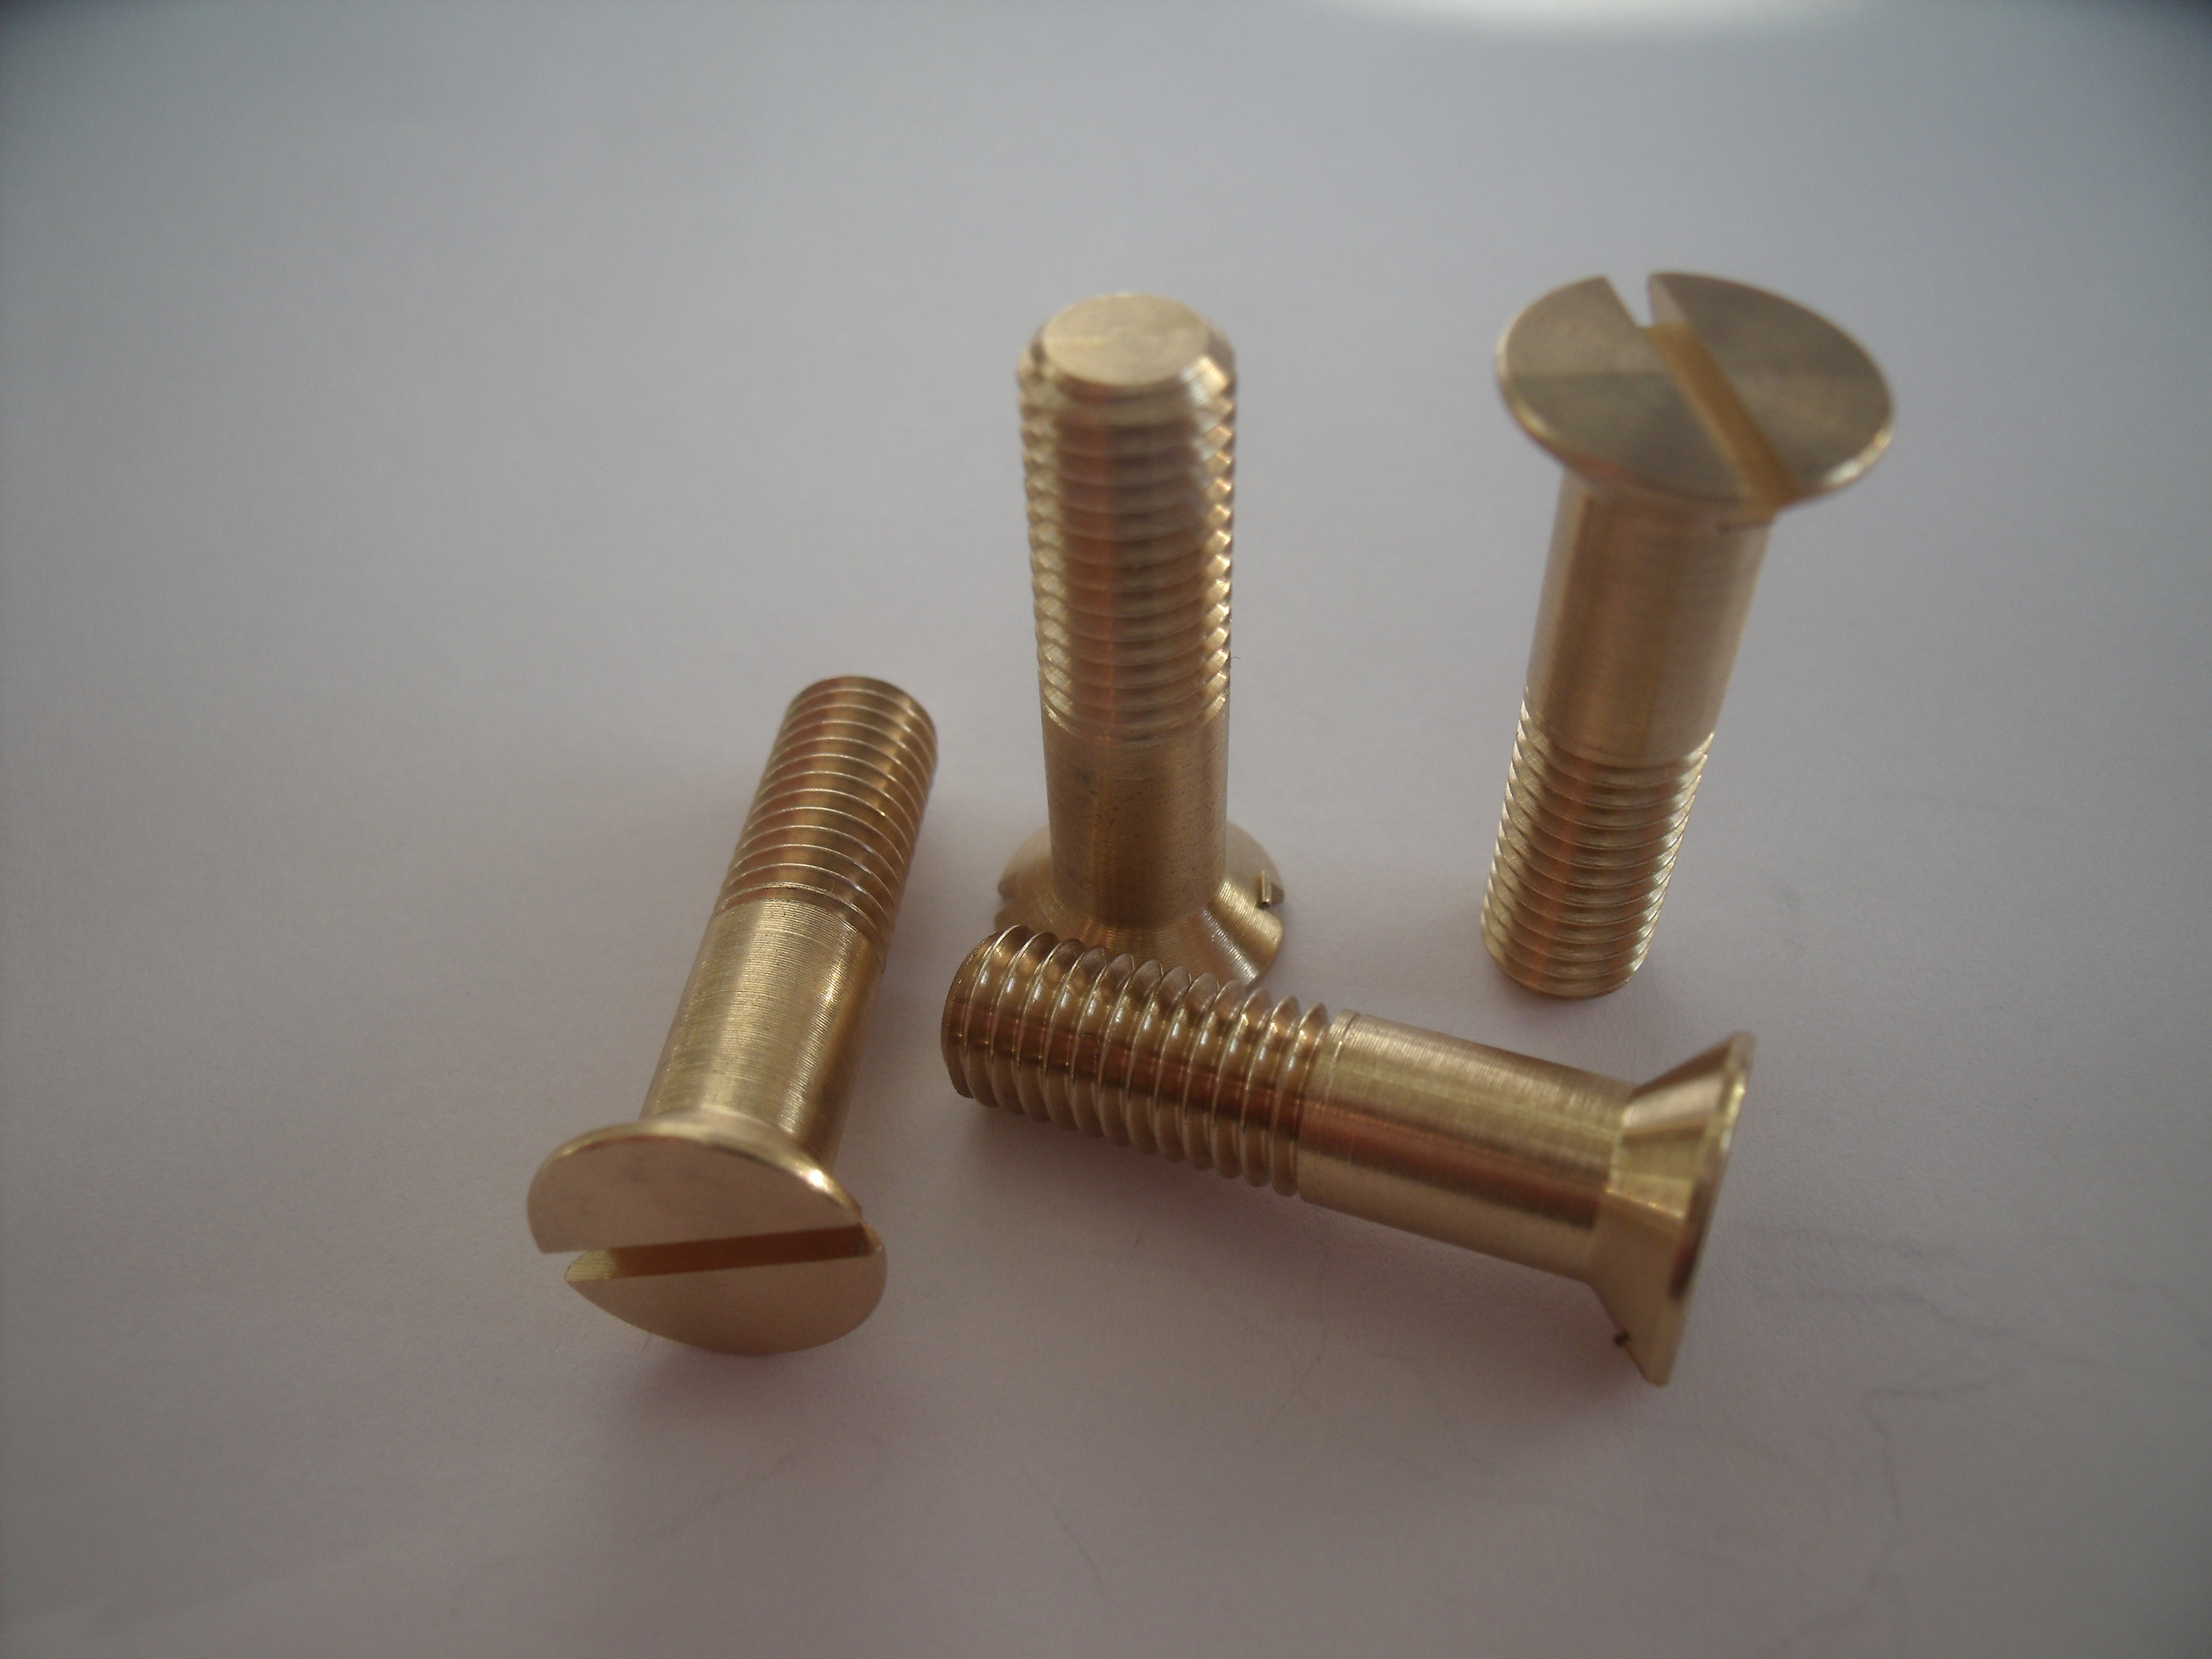 1/4" BSW BRASS BOLTS SETS of 5 pcs--Hex head,100 bolts available 1.50" long.